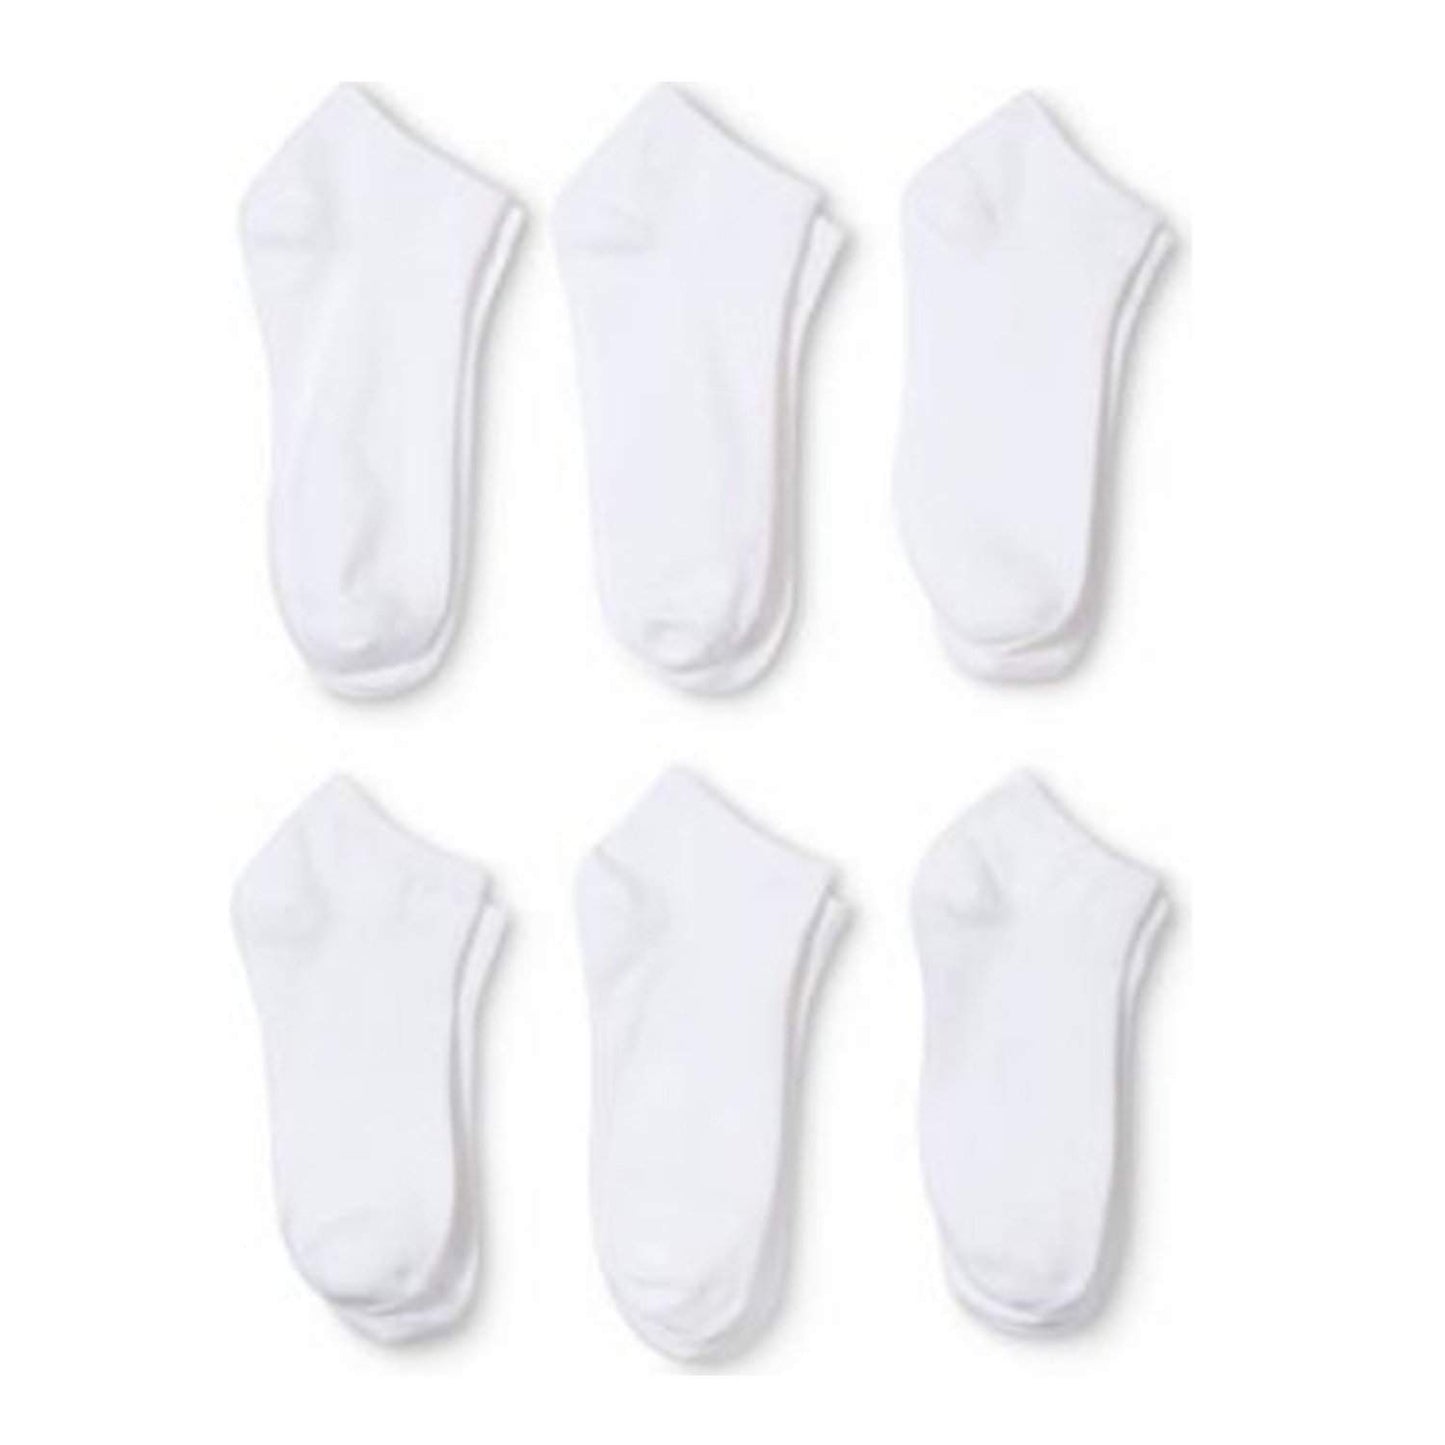 Mechaly Womens Basic Super Comfortable Low Cut and Crew Cotton Socks - 12 Pack